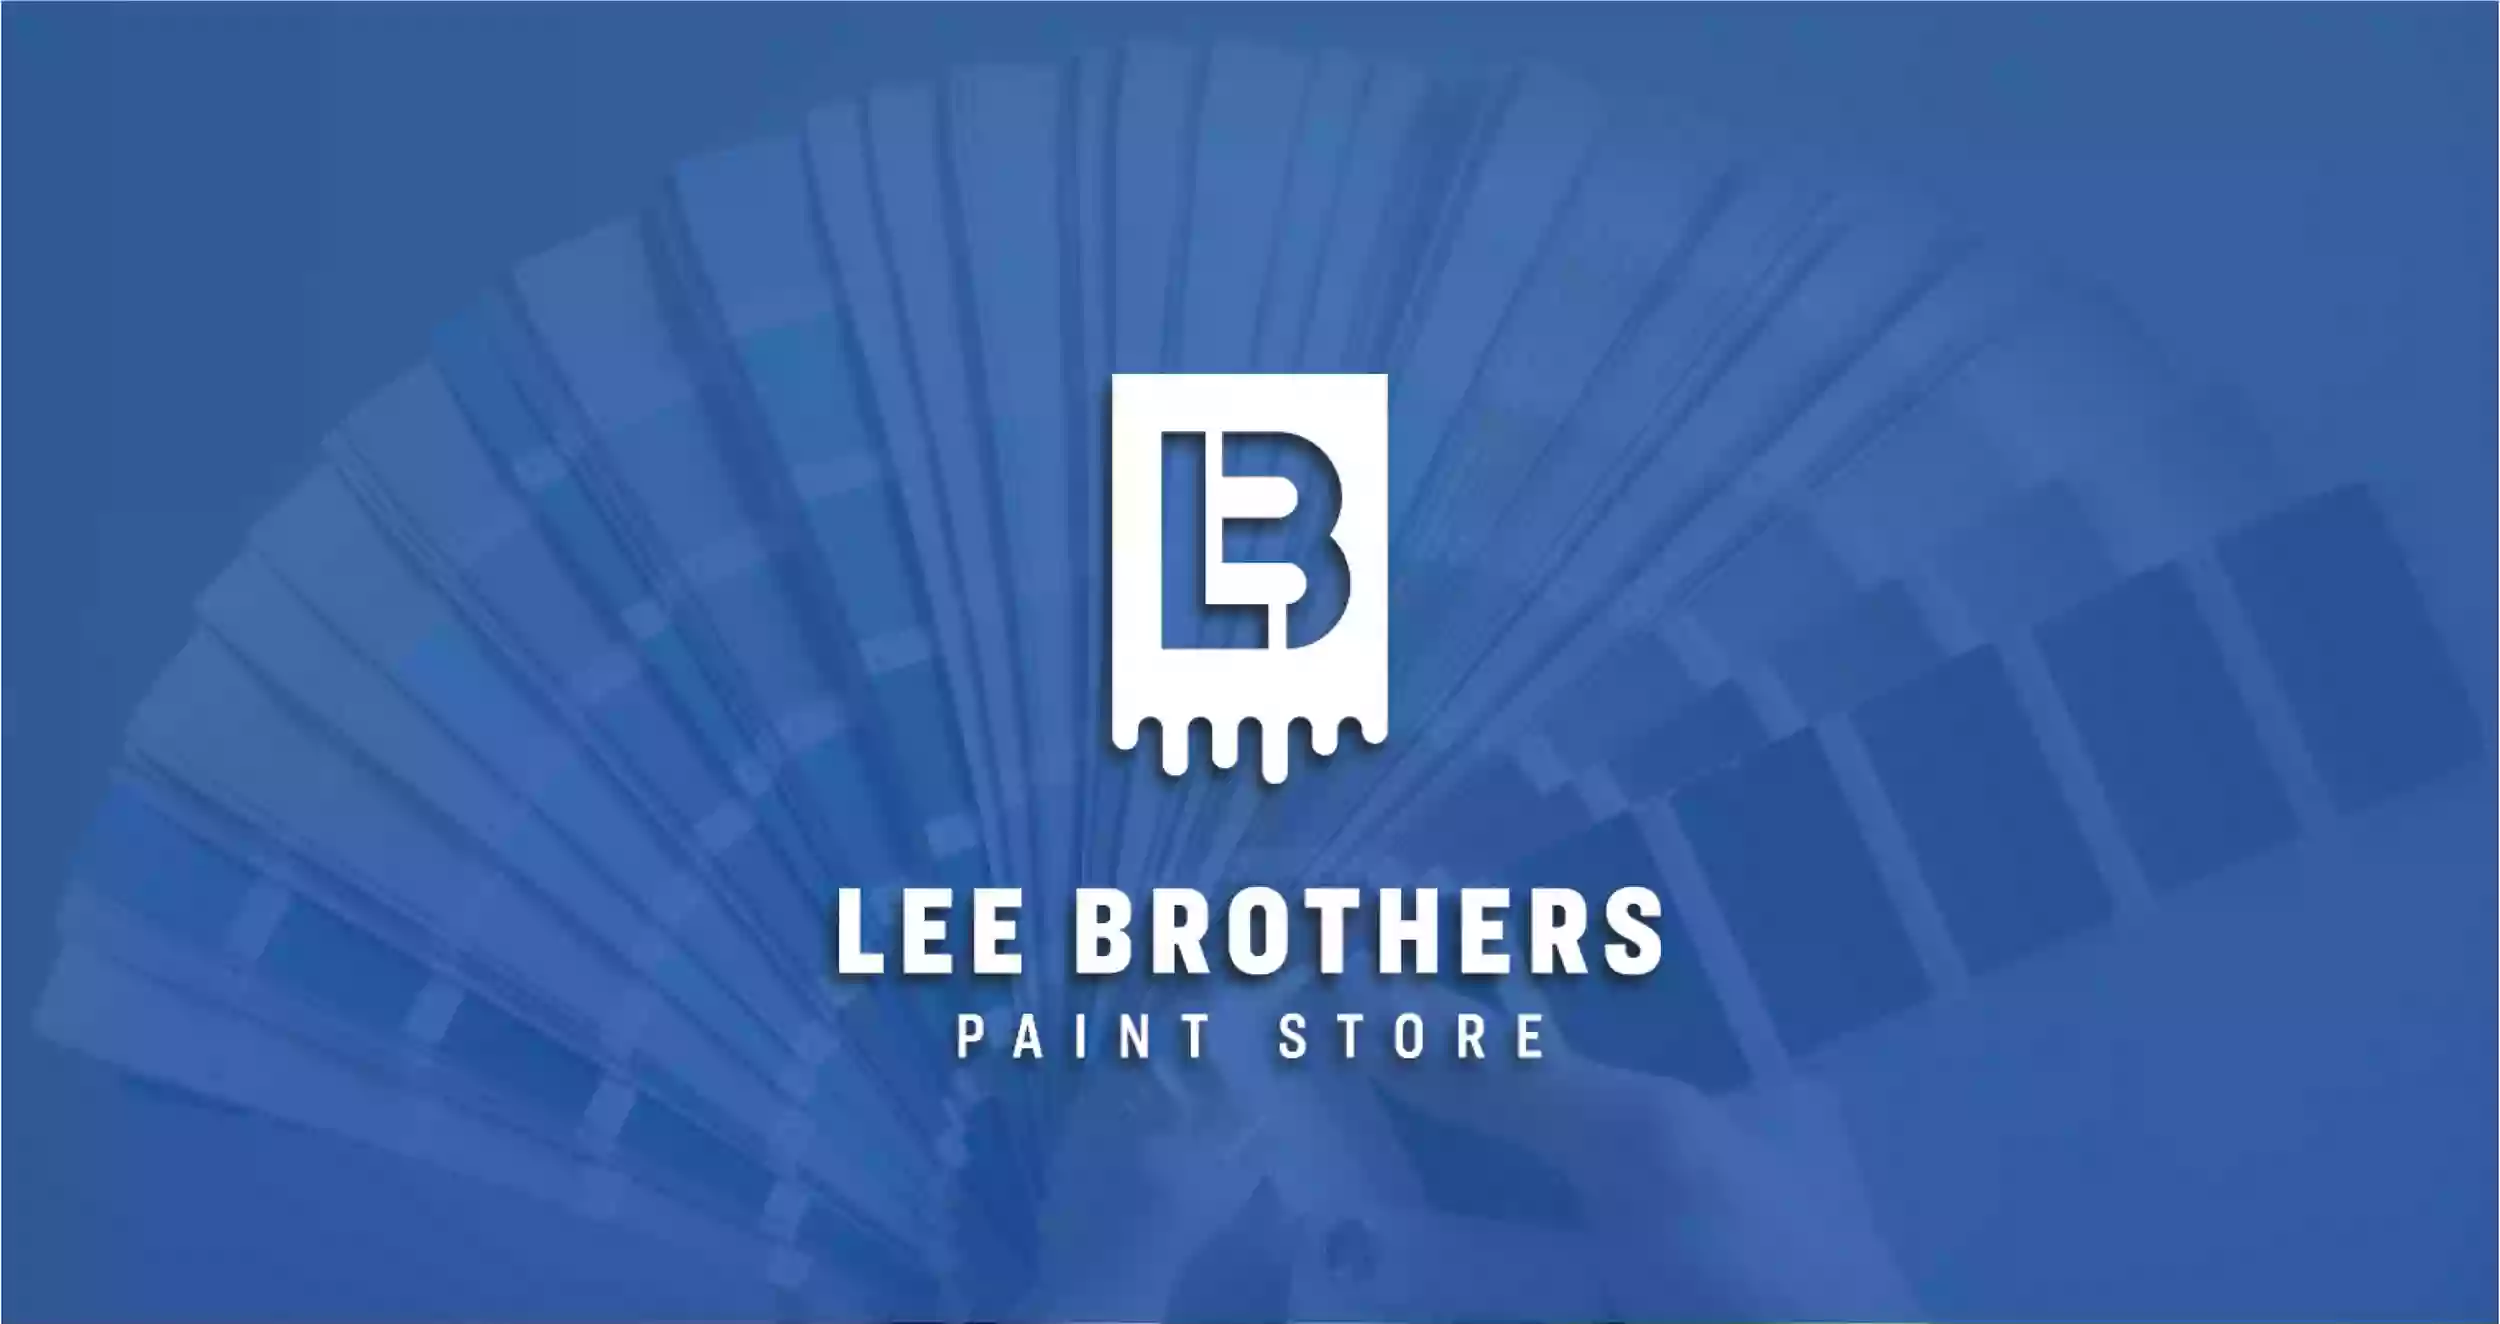 Lee Brothers Paint Store